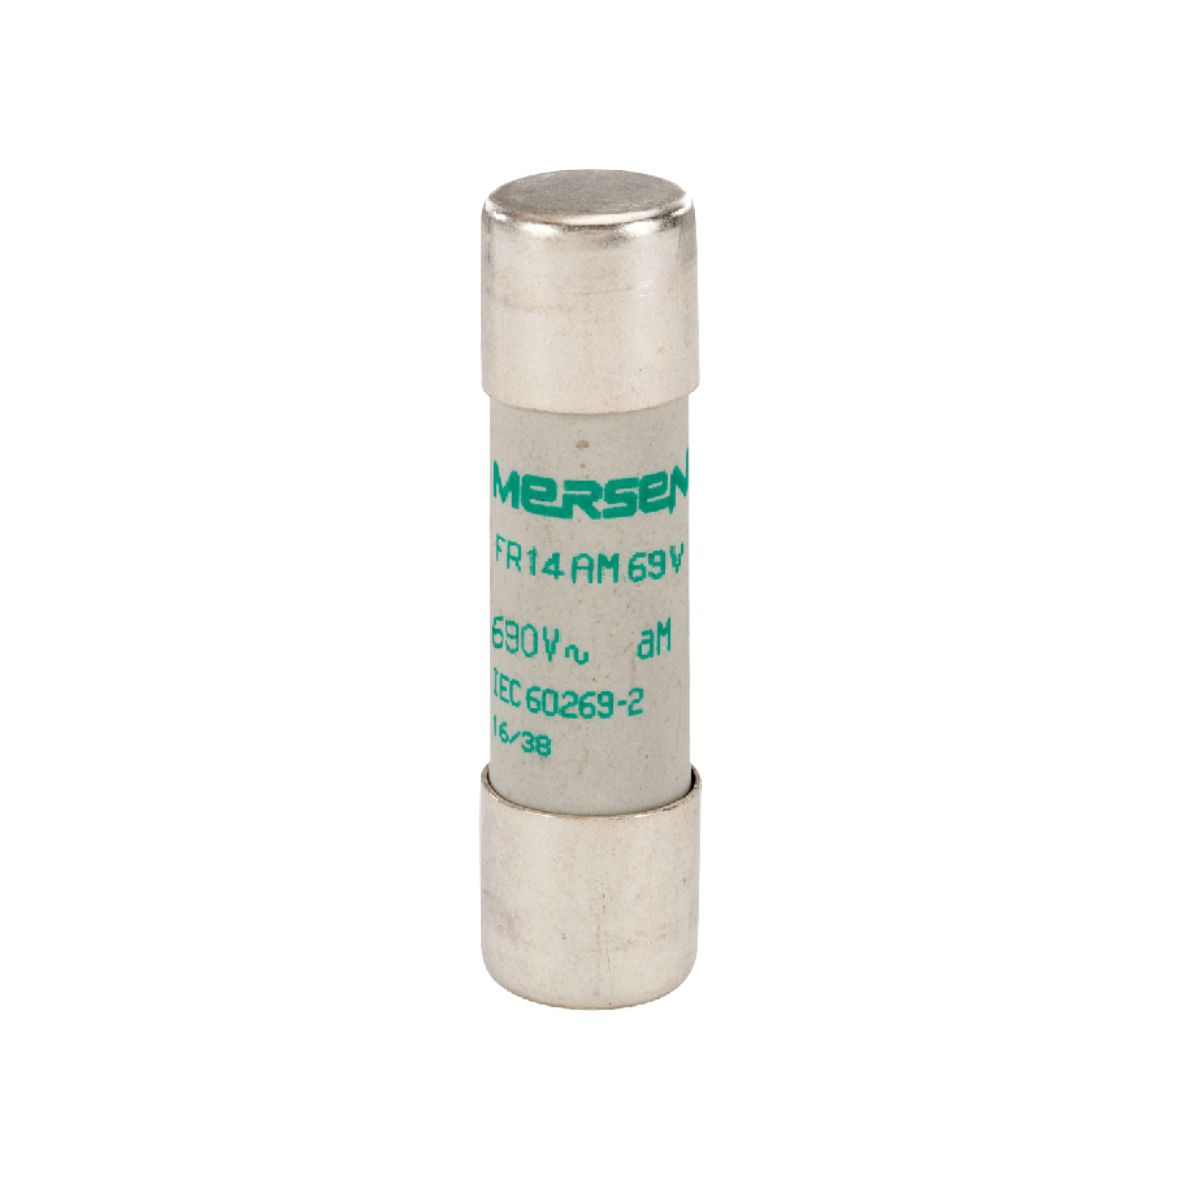 P218720 - Cylindrical fuse-link aM 690VAC 14.3x51, 20A